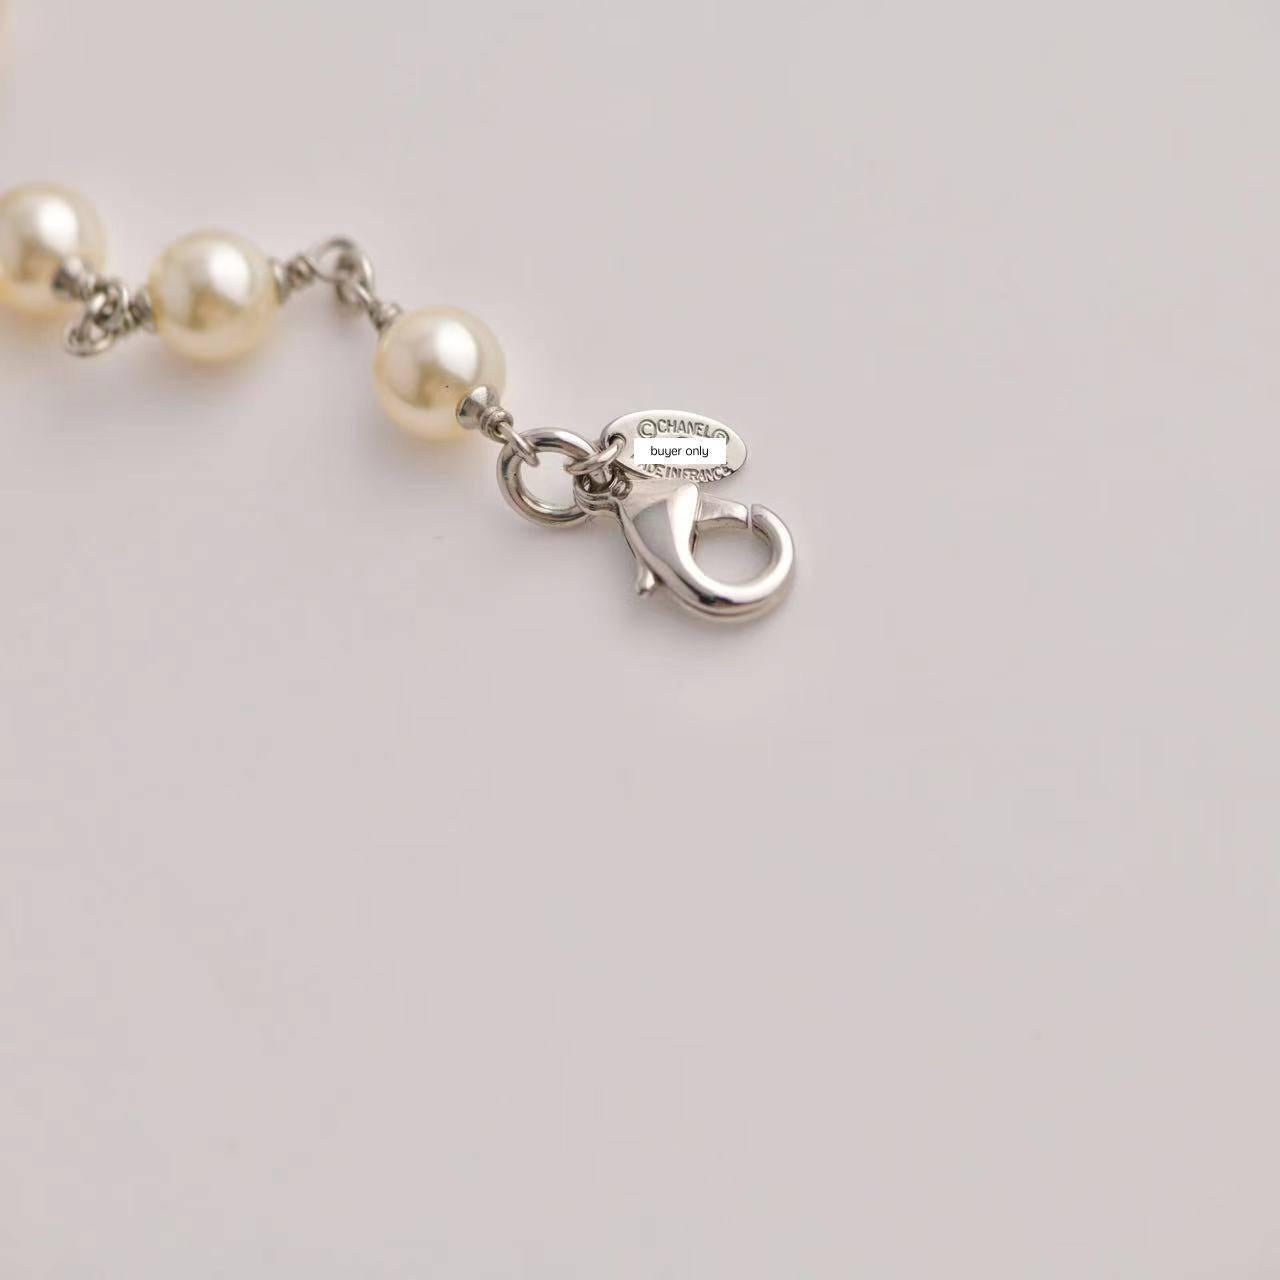 Chanel Pearl Sautoir Necklace with Five CC Logos 2